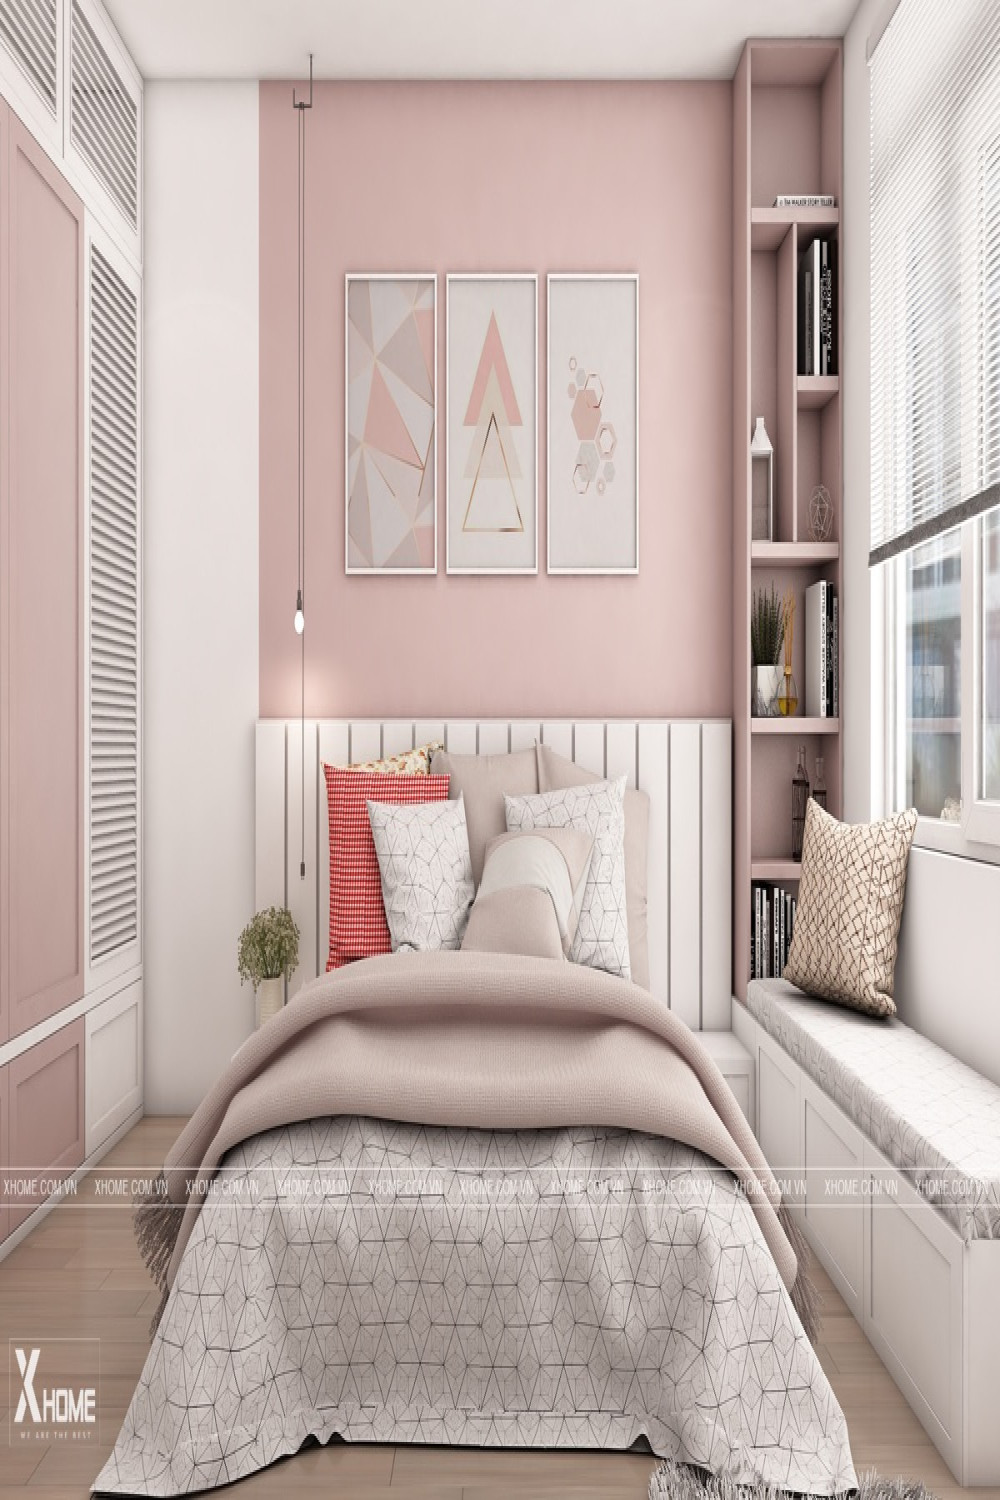 10 Chic Pink Bedroom Ideas For Sophisticated Adults – Joseph Bosco ...